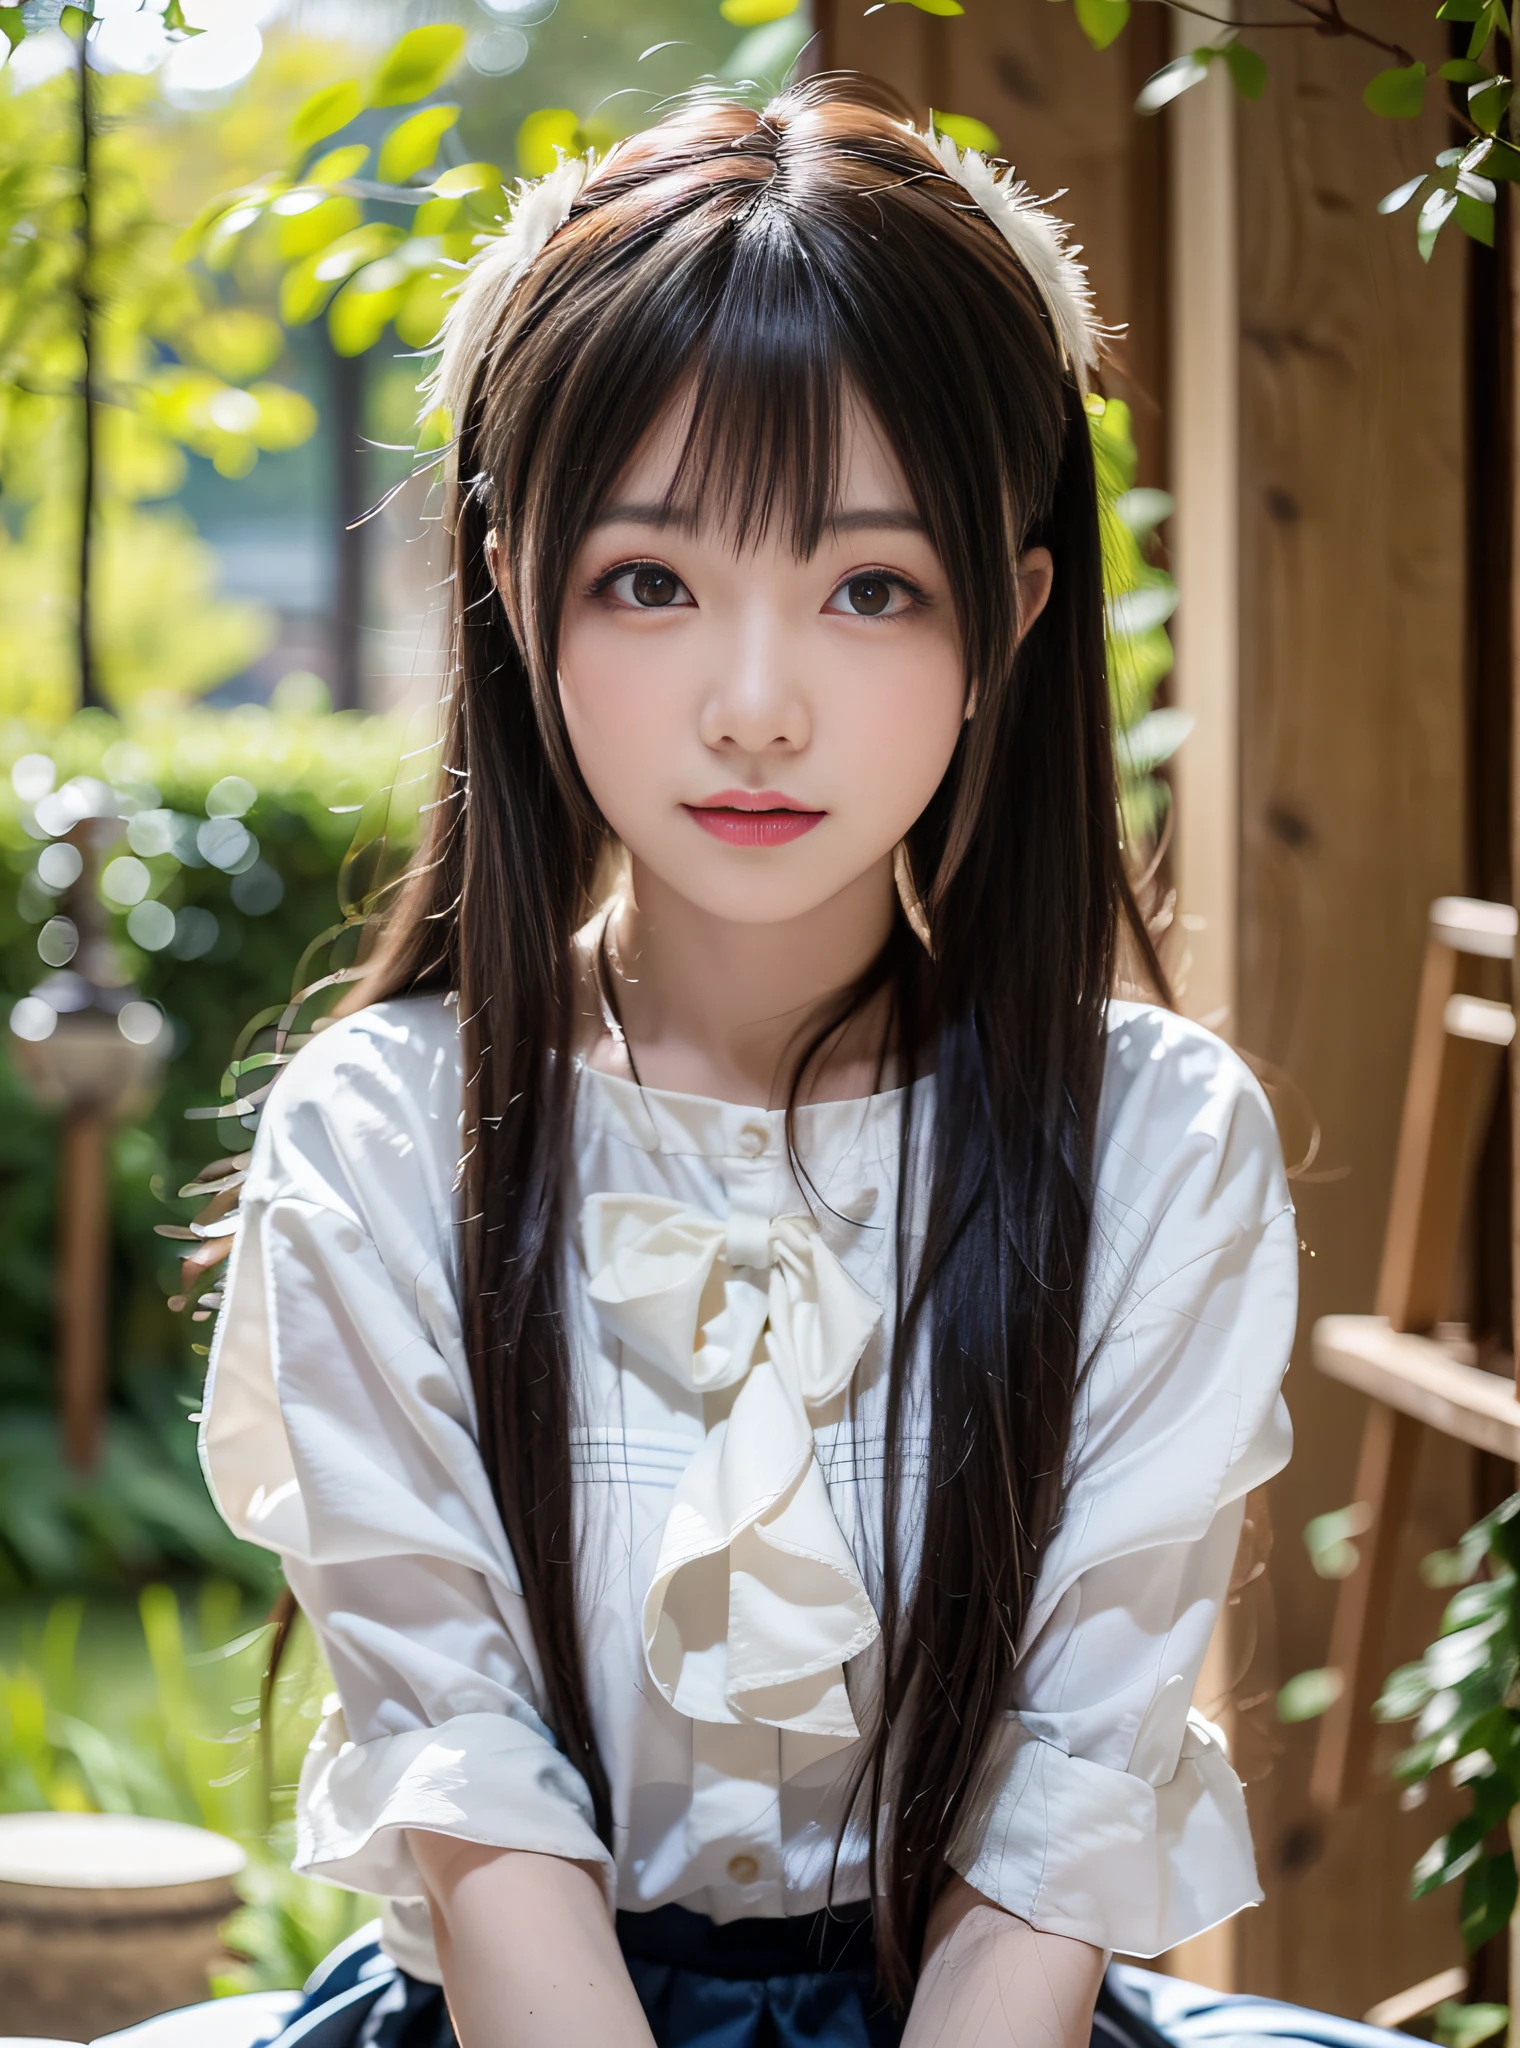 (masutepiece, top-quality:1.32), (Ultra High Quality, 超A high resolution: 1.3), (CG Unity 8k wallpapers:1.2), (Detailed eyes and skin:1.35), (detailed facial features:1.25), (Detailed eyes:1.36), precise and perfect human body structure, (Textured skin: 1.26), (Realistic, photographrealistic: 1.27), depth of fields、Film Lighting、Shading by sunlight、
Very cute 16 year old girl、Cute jaw、solo、Sauce order, long eyeslashes, bags under eyes, brown haired, thick bangs, curlyhair、shinny hair、Show white teeth and smile、
skirt by the、sorcerer、long boots、fancy、